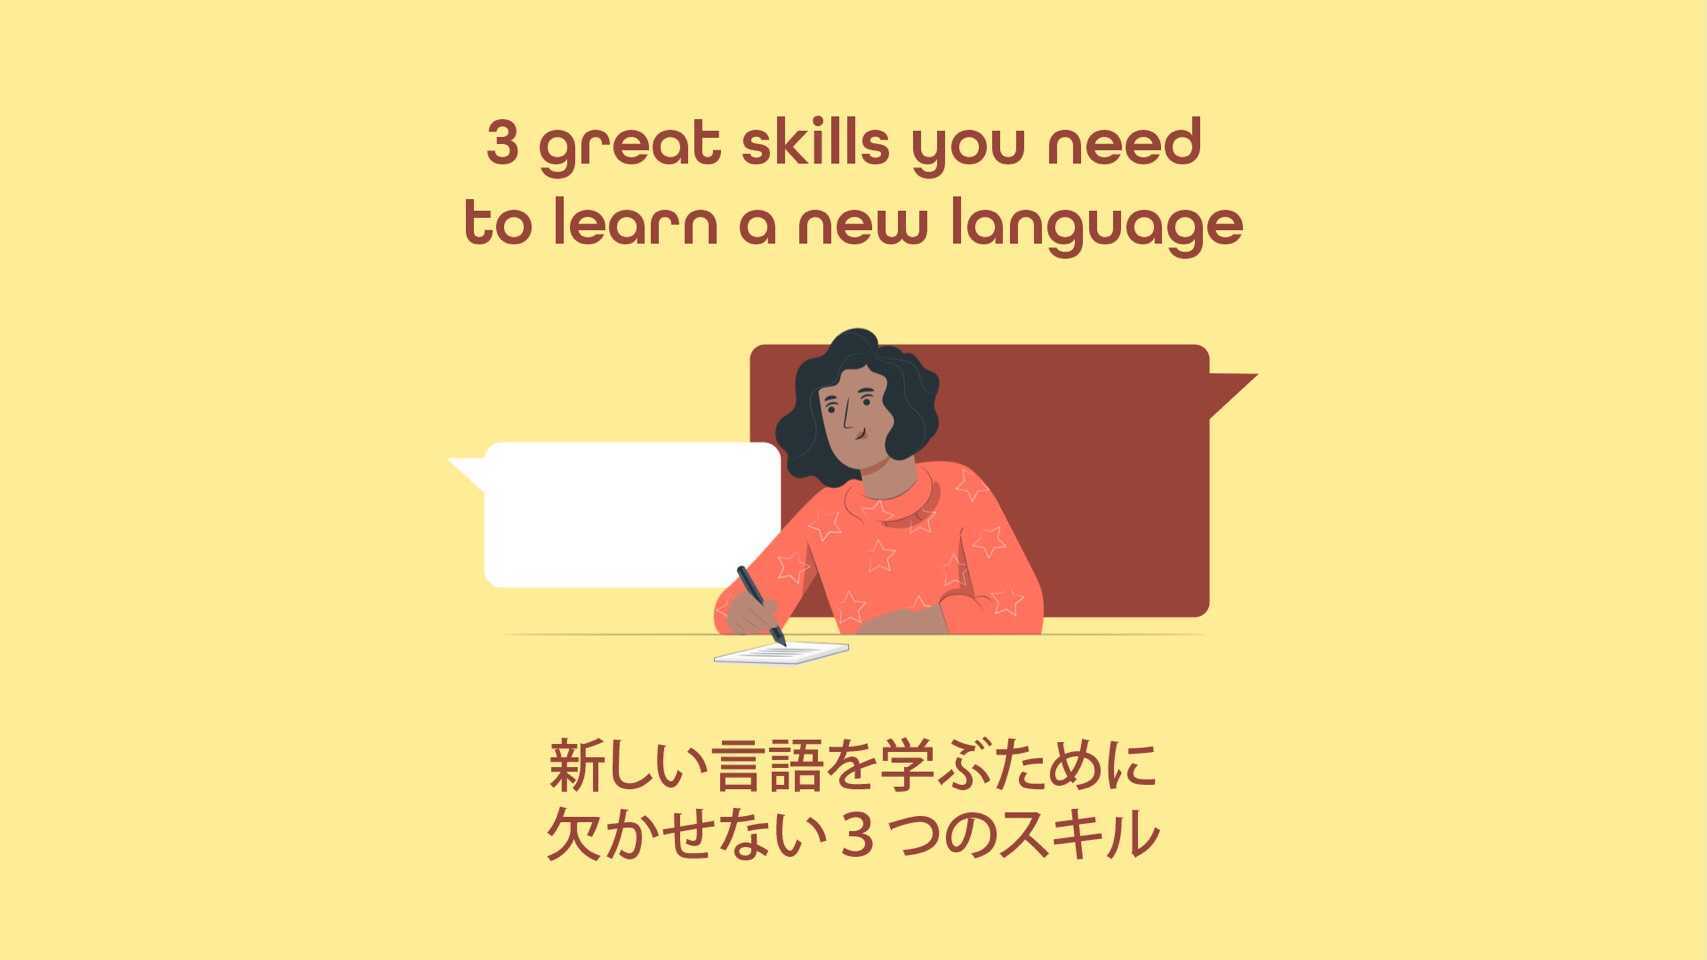 3 great skills to have when learning a new language, 新しい言語を学ぶために欠かせない３つのスキル learning a new language